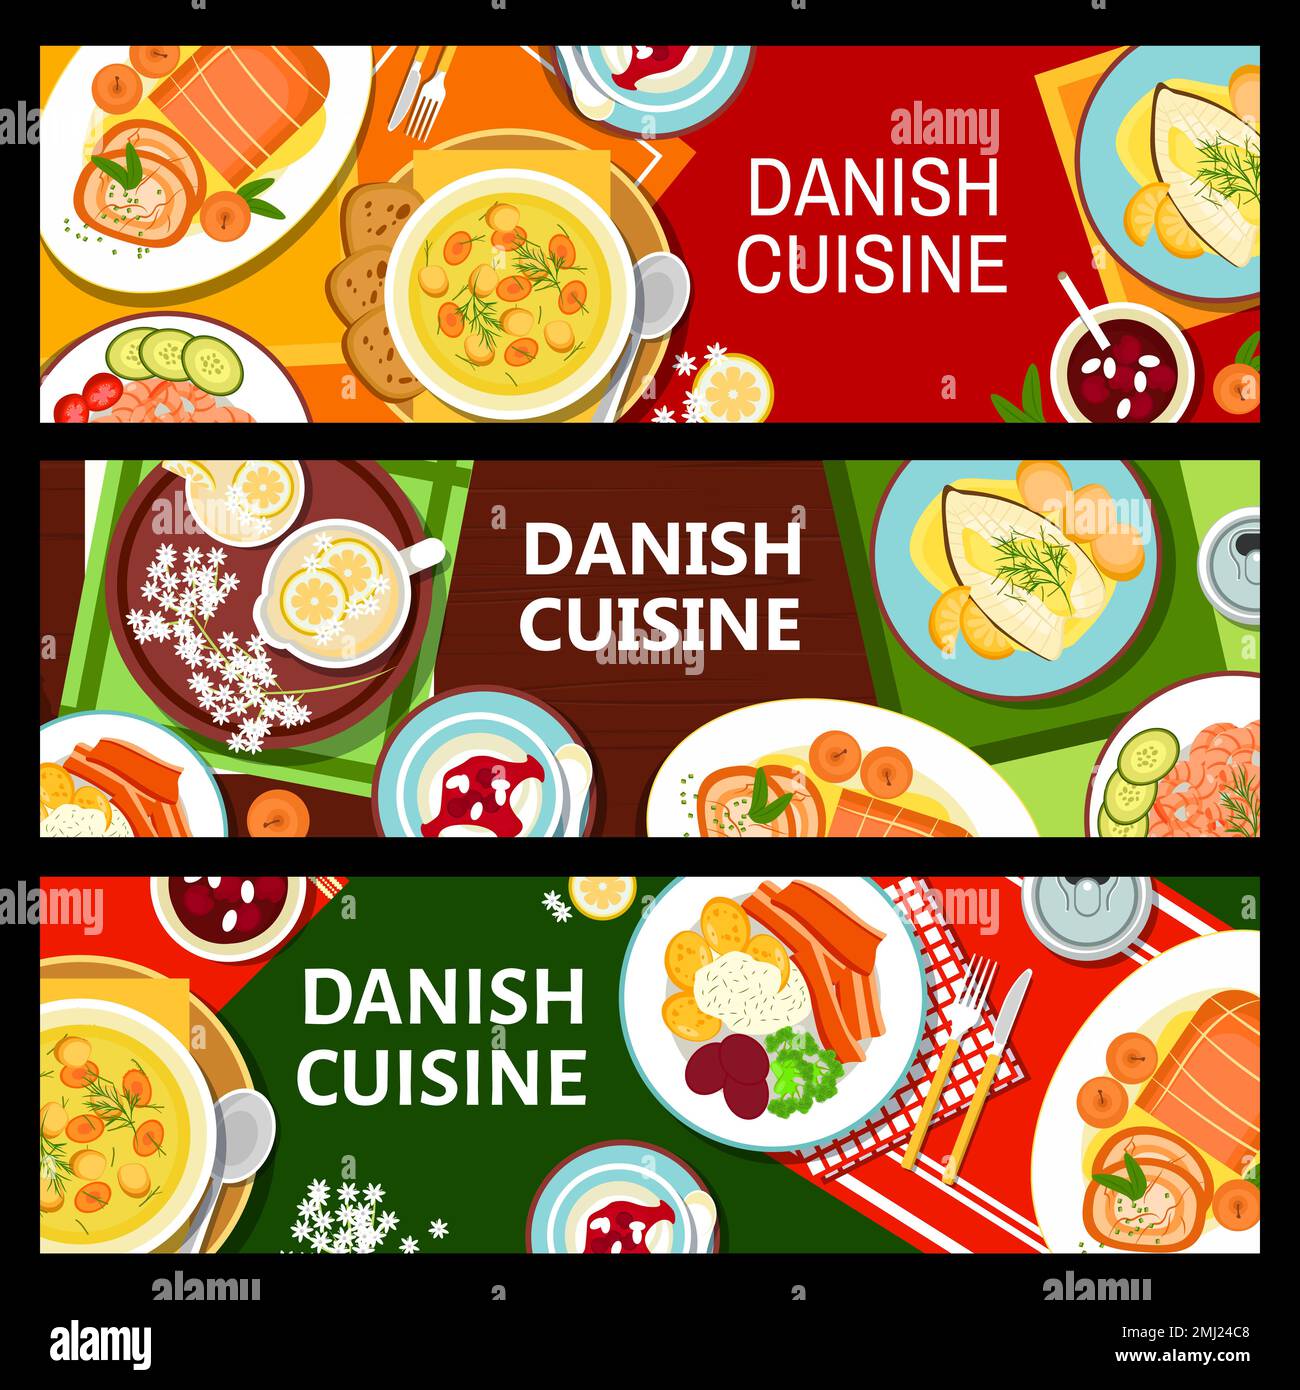 Danish cuisine meals menu banners. Roast pork with baked apples, meatball potato soup and elderflower lemonade, shrimp cocktail, fried cod and pork belly and parsley sauce, almond pudding Risalamande Stock Vector